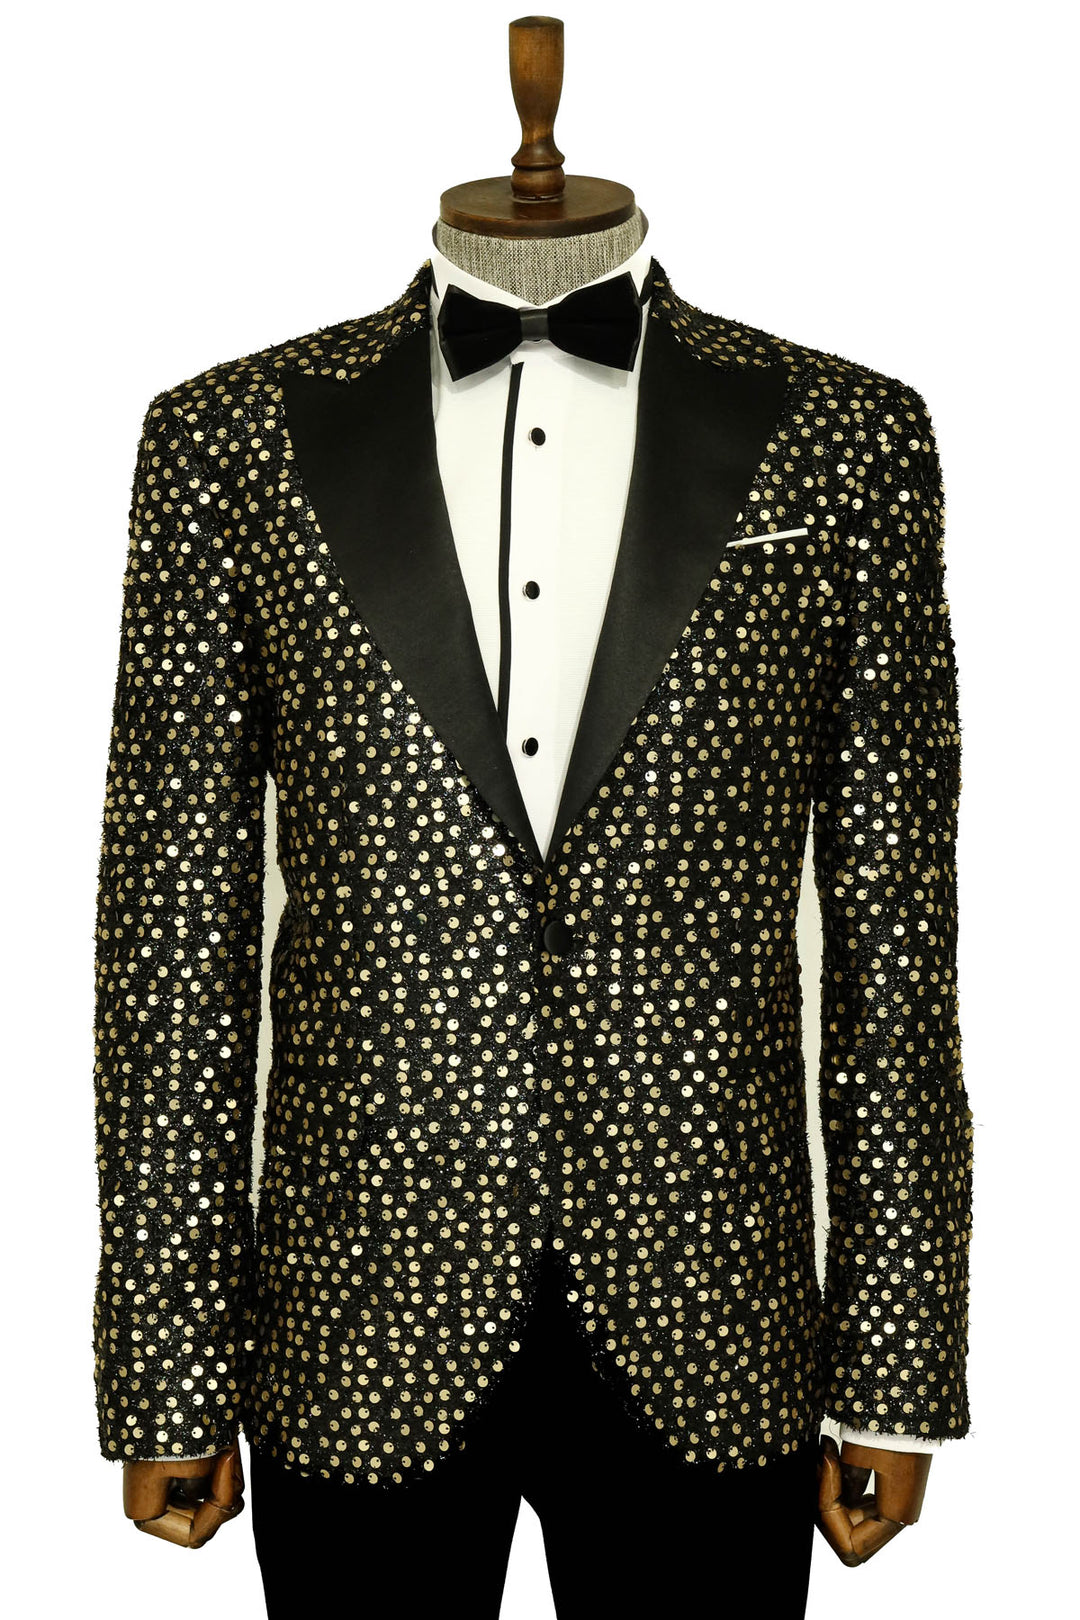 Smoked Sparkly Patterned Party Blazer - Wessi